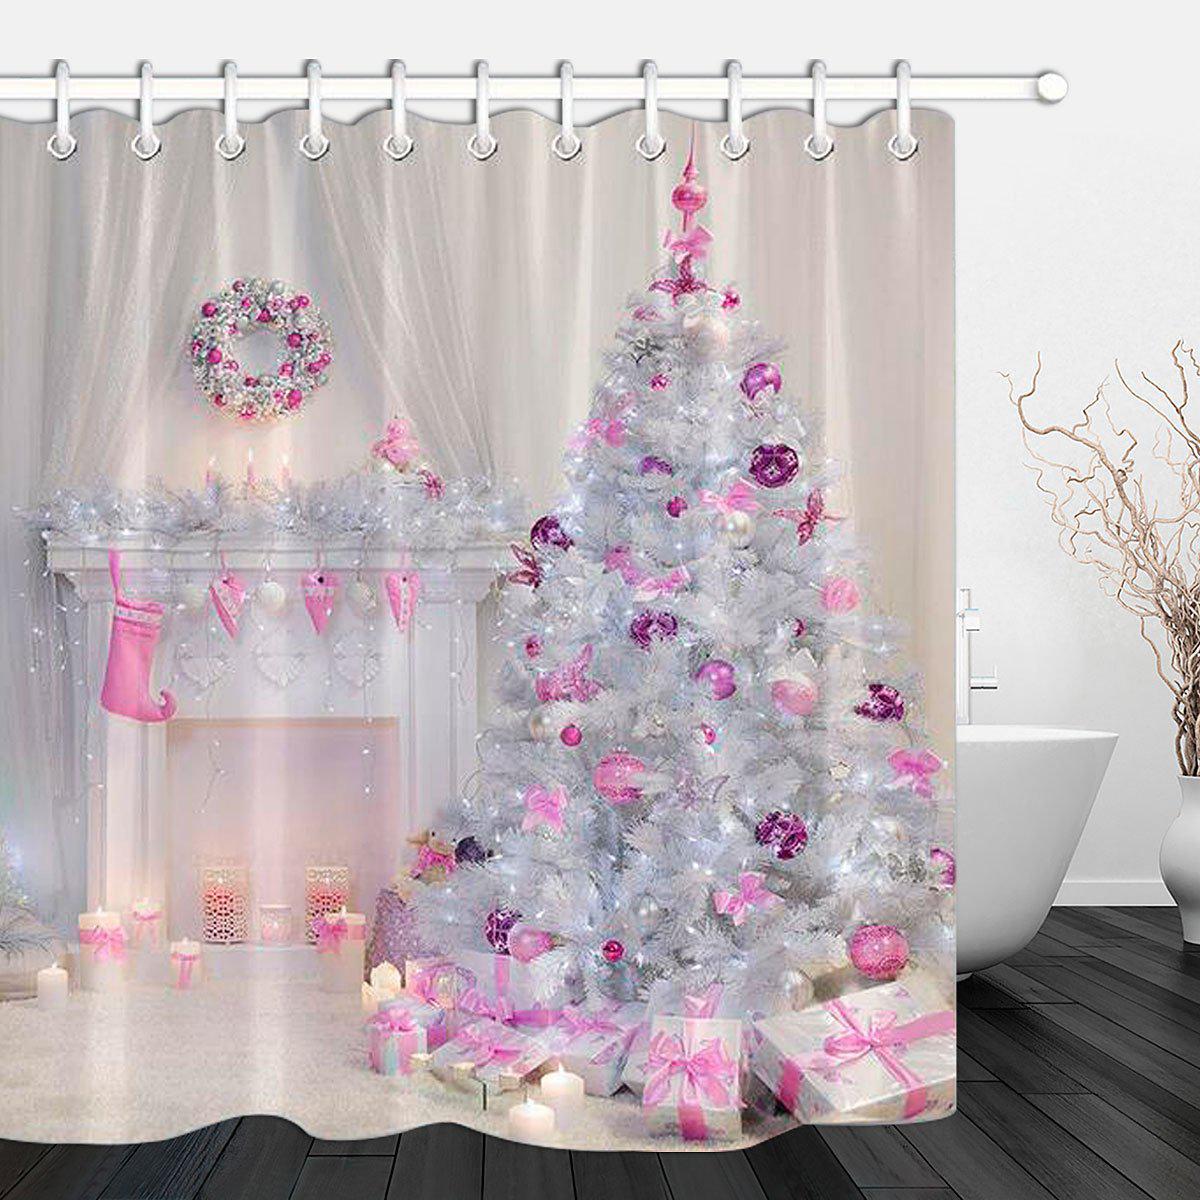 Christmas Tree Interior Xmas Fireplace in Pink Decorated Indoors Shower Curtain Bathroom Sets With Mat Bathroom Fabric For Bathtub Decor